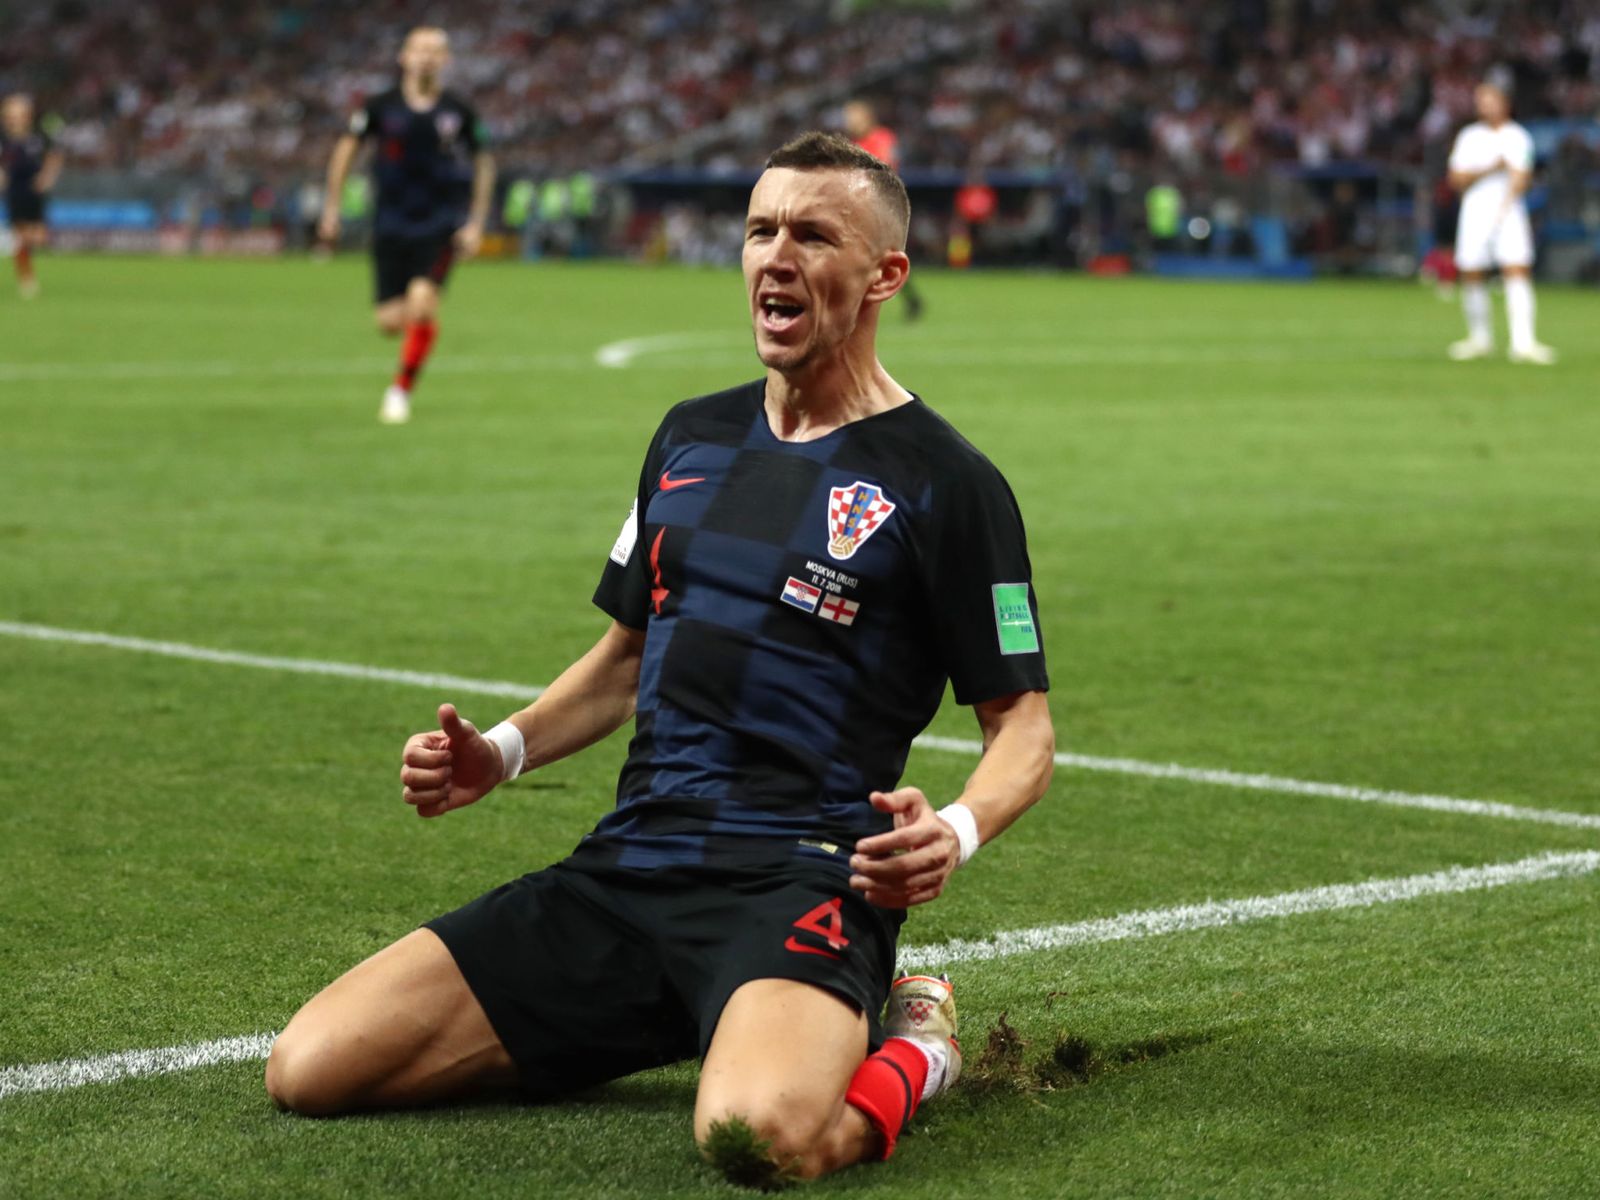 England knocked out after losing 2-1 to Croatia in extra-time in the semi-final